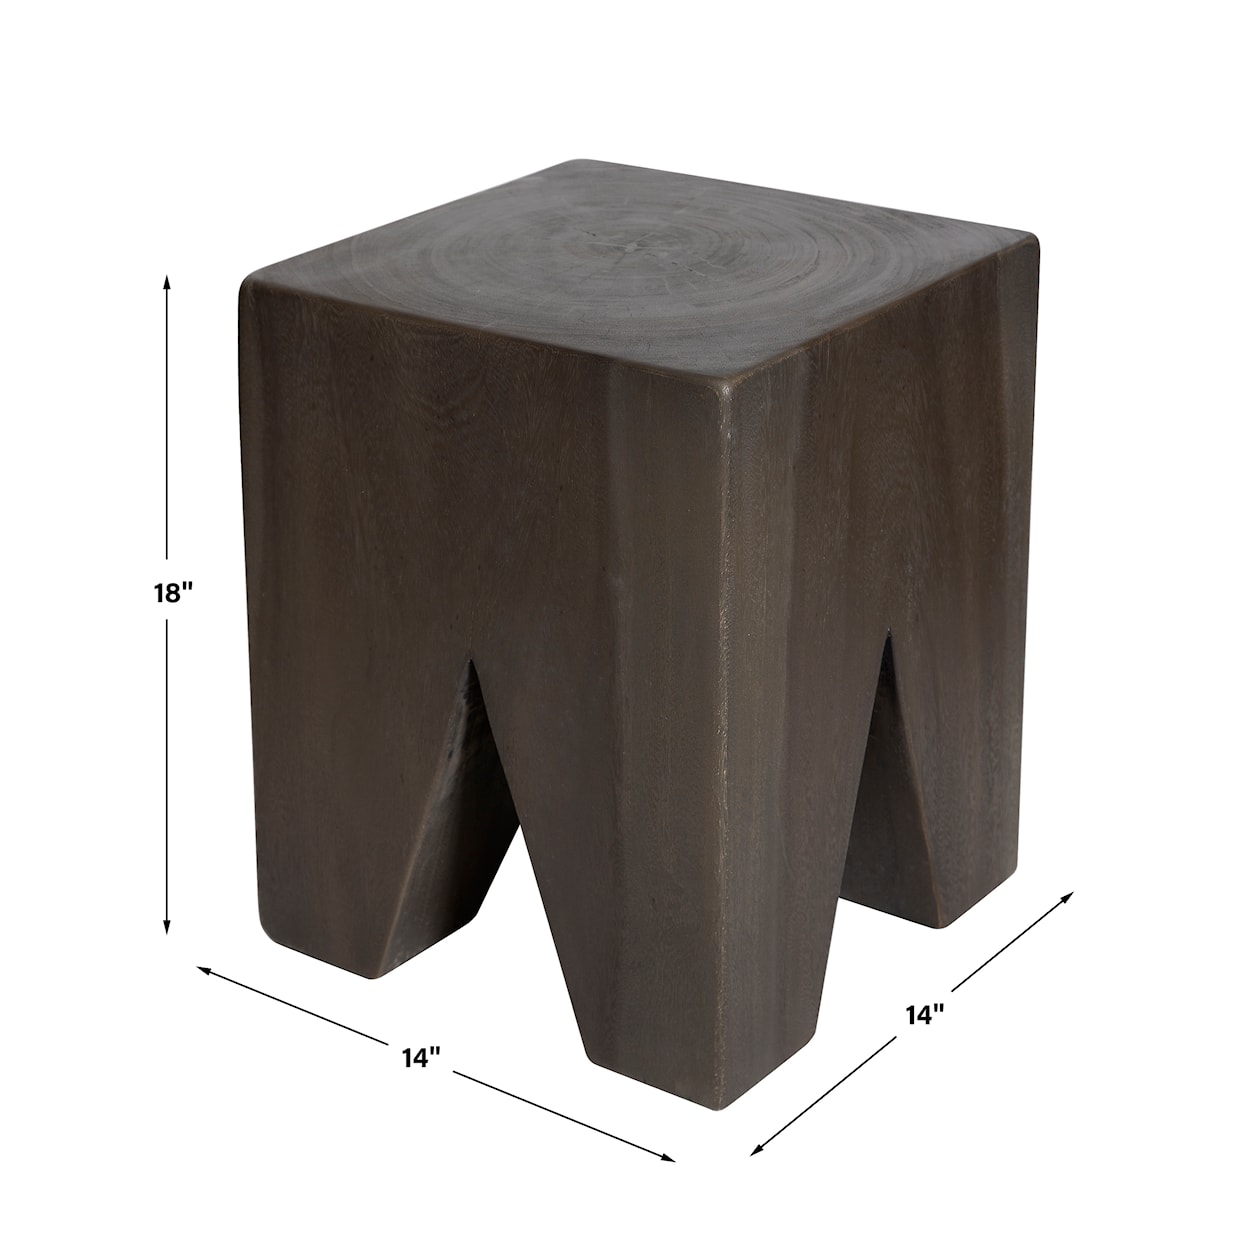 Uttermost Armin Armin Solid Wood Accent Stool